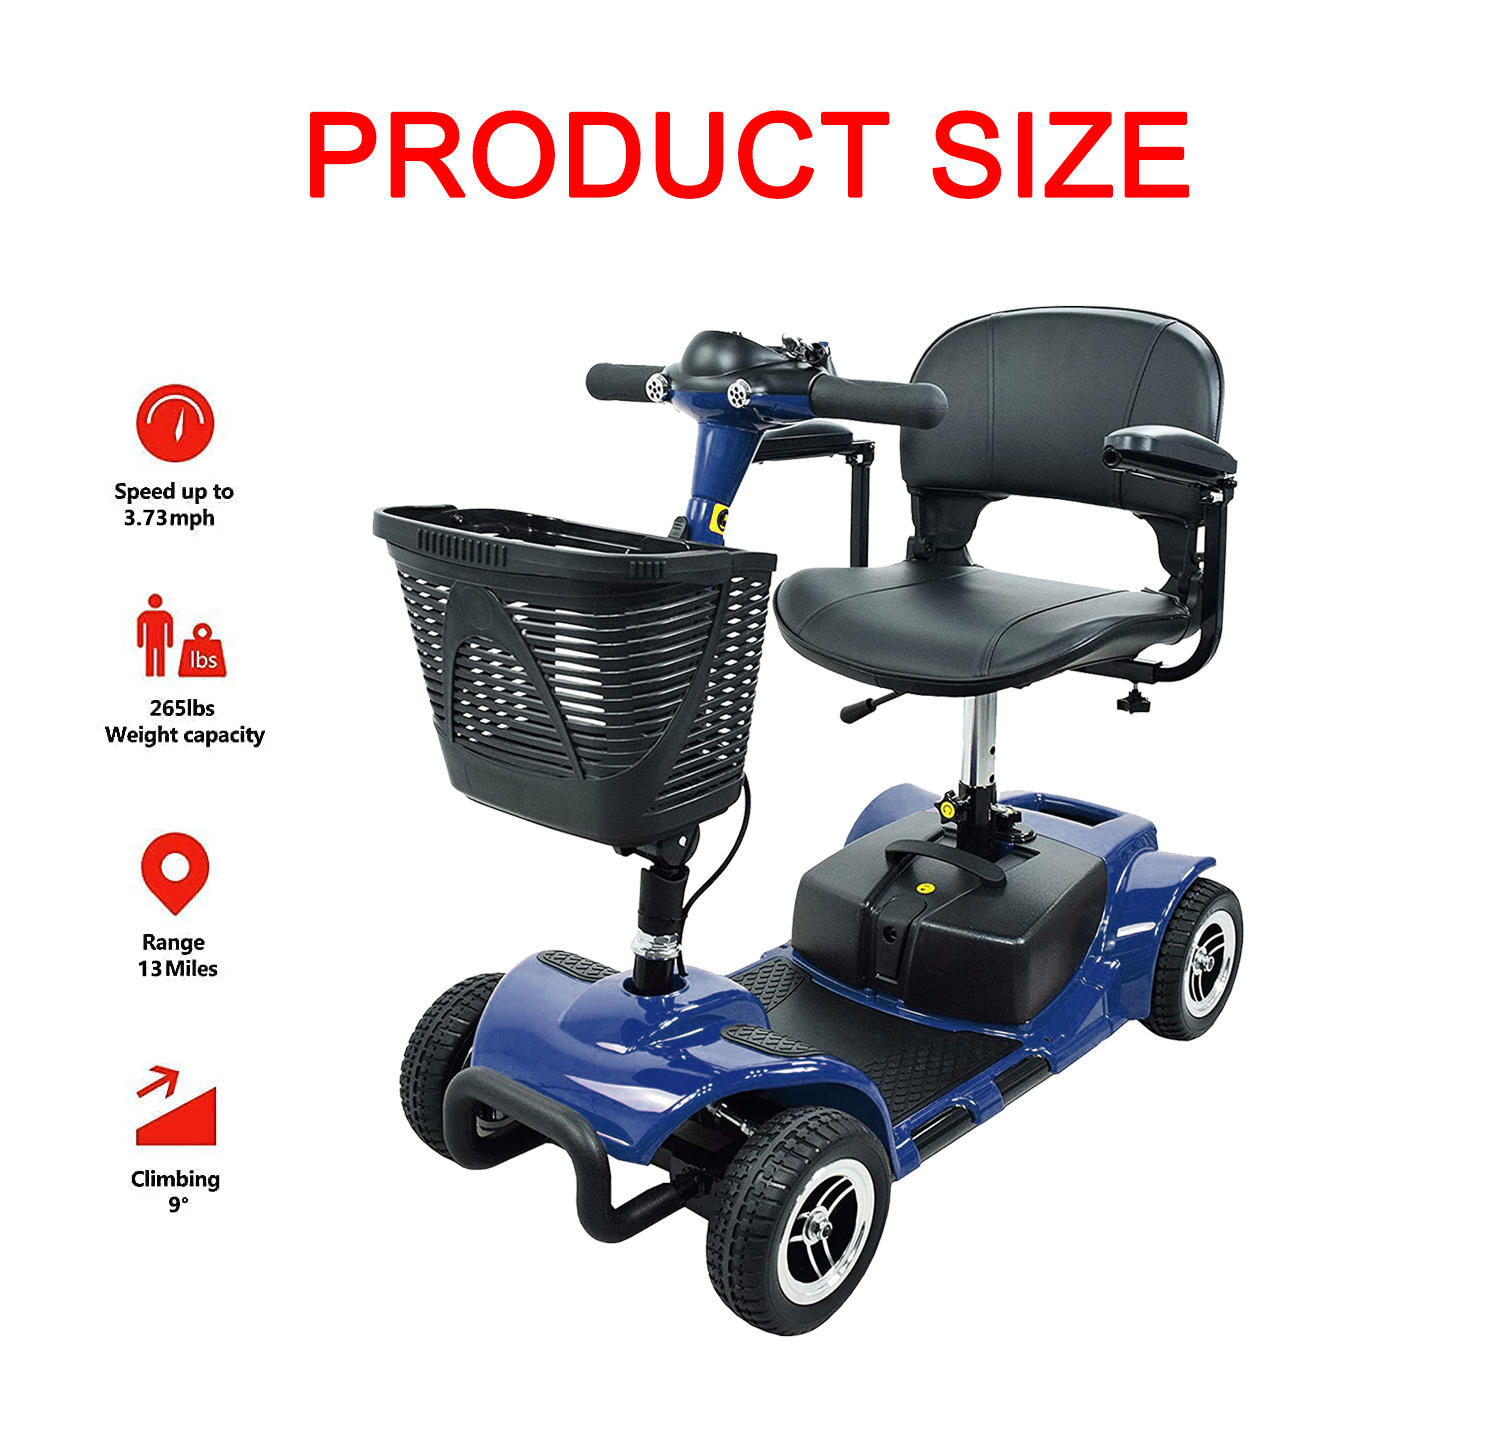 Emotor 265lbs Mobility Scooter for Seniors Elderly Adults, 250W Strong Motor w/ Stable 4 Wheels Scooter